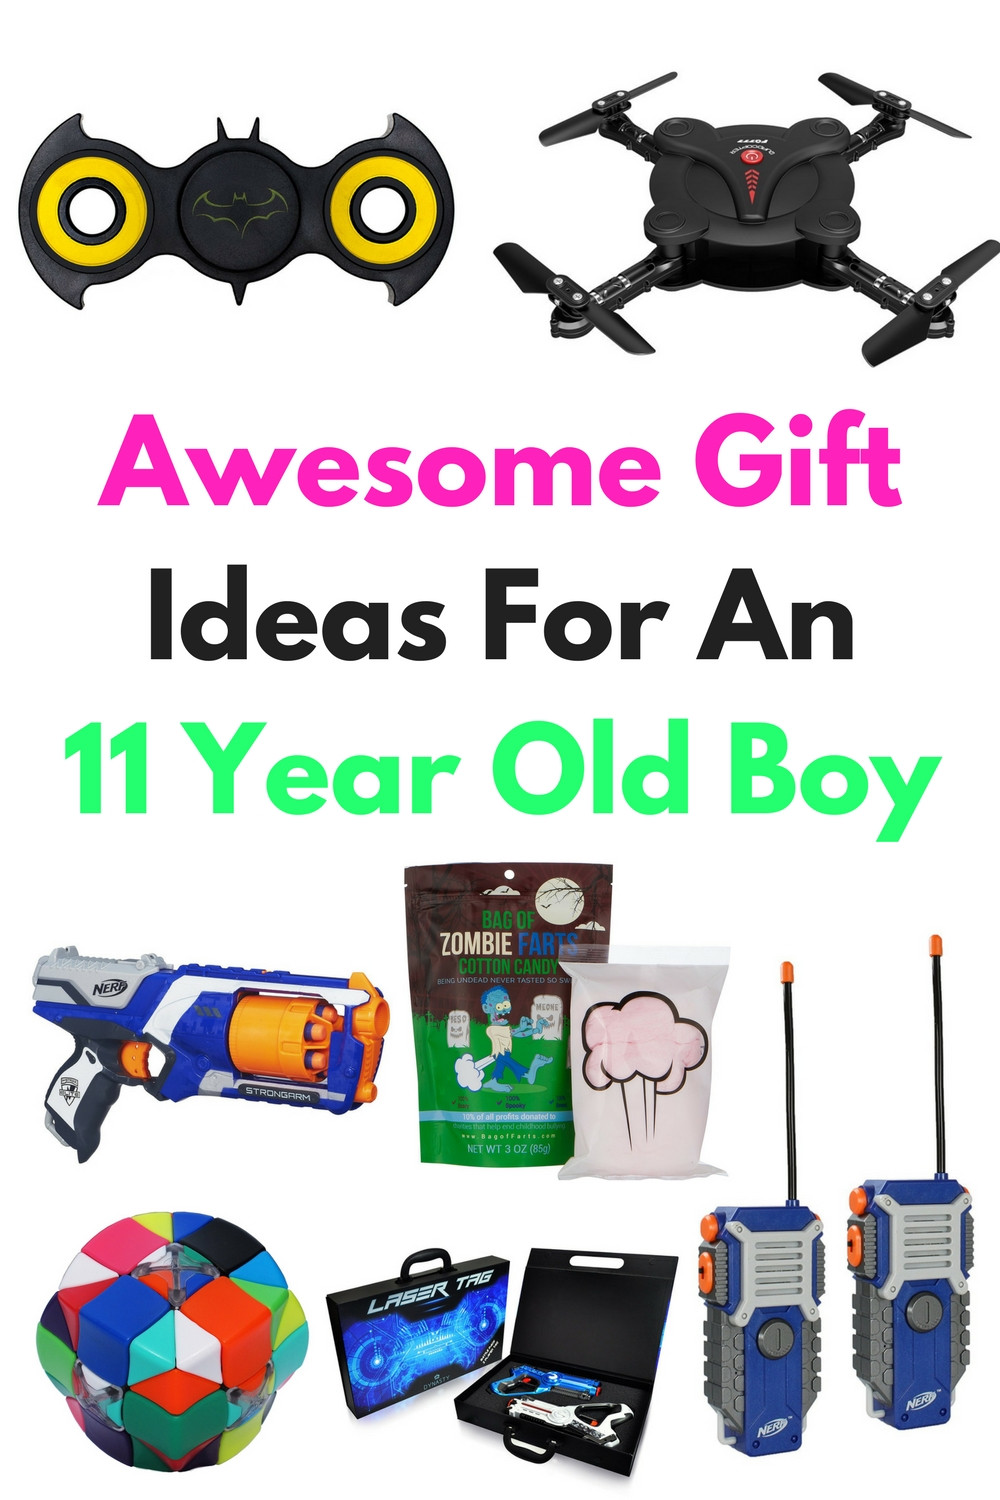 Gift Ideas For 13 Year Old Boys
 Awesome Gift Ideas For An 11 Year Old Boy